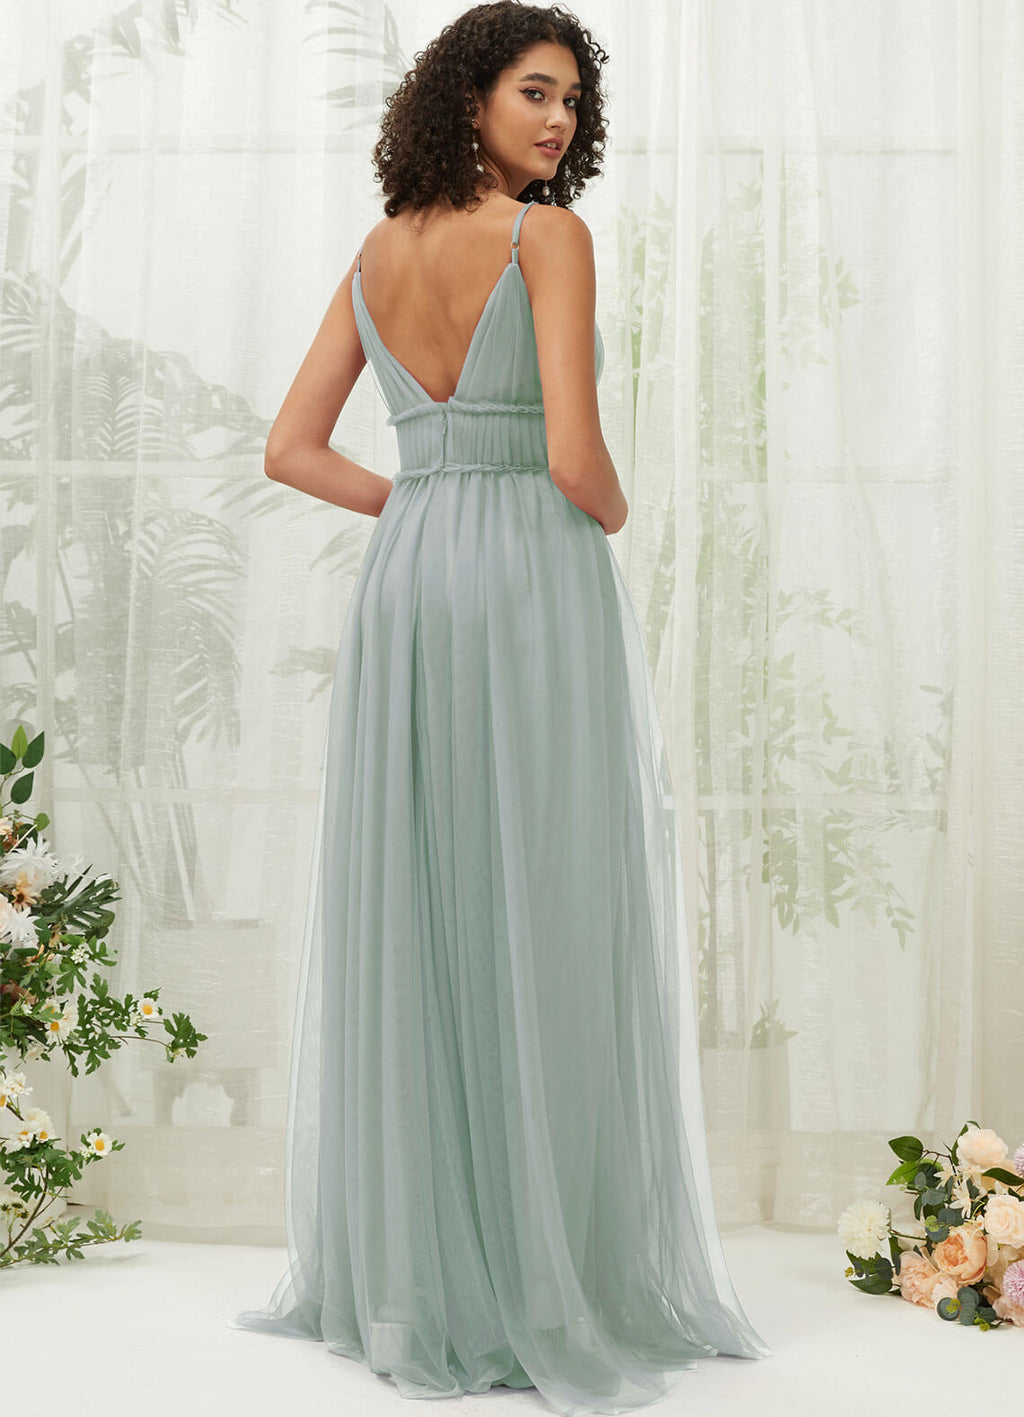 NZ Bridal Sage Green Pleated Tulle Maxi Backless bridesmaid dresses R1029 Alma a